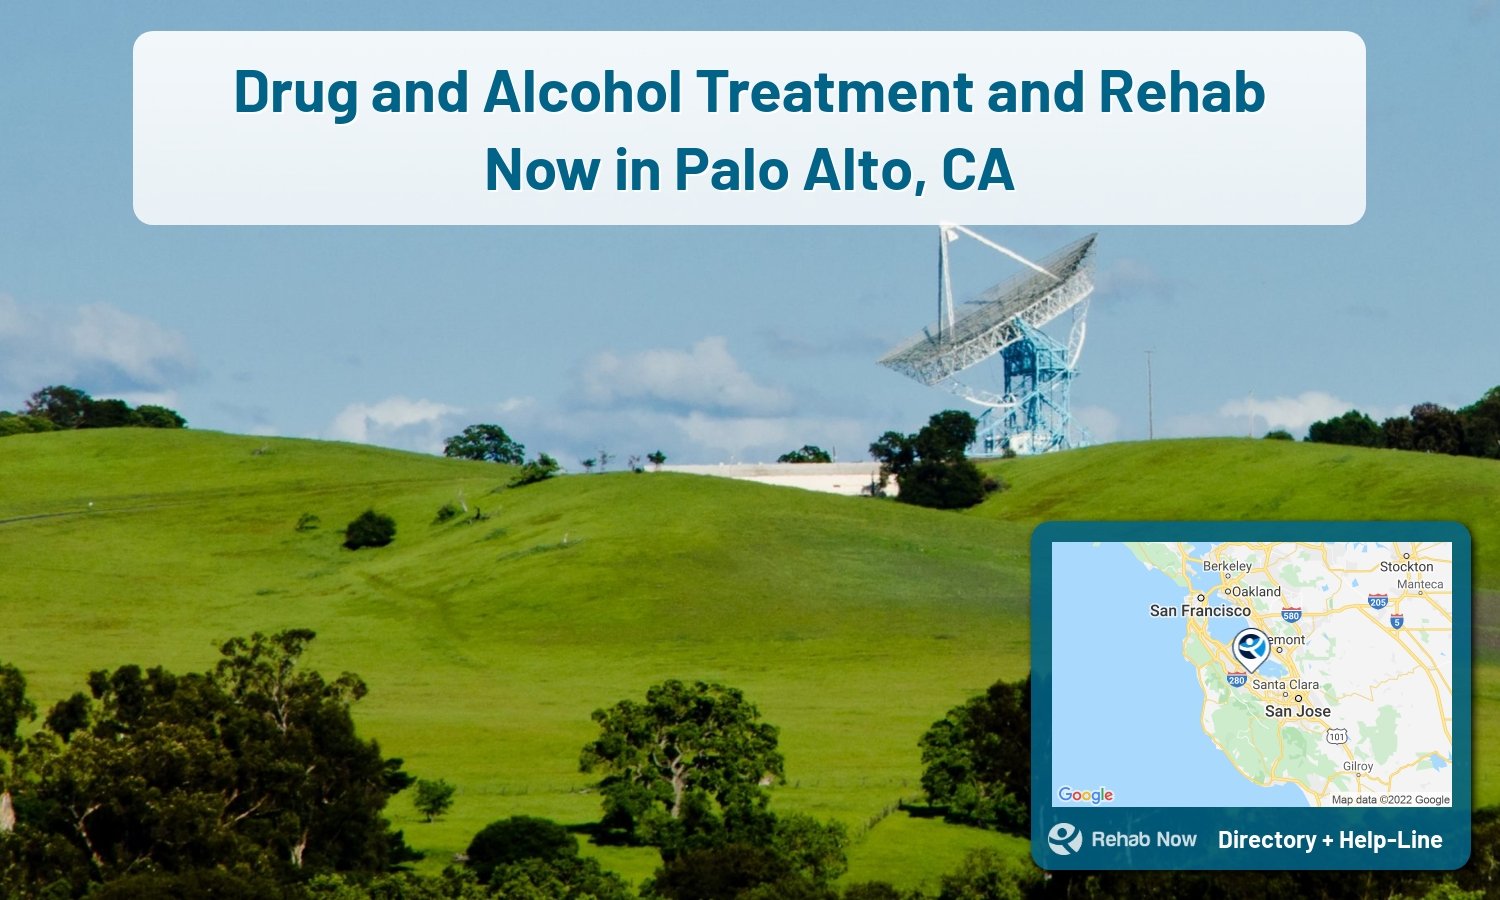 Palo Alto, CA Treatment Centers. Find drug rehab in Palo Alto, California, or detox and treatment programs. Get the right help now!